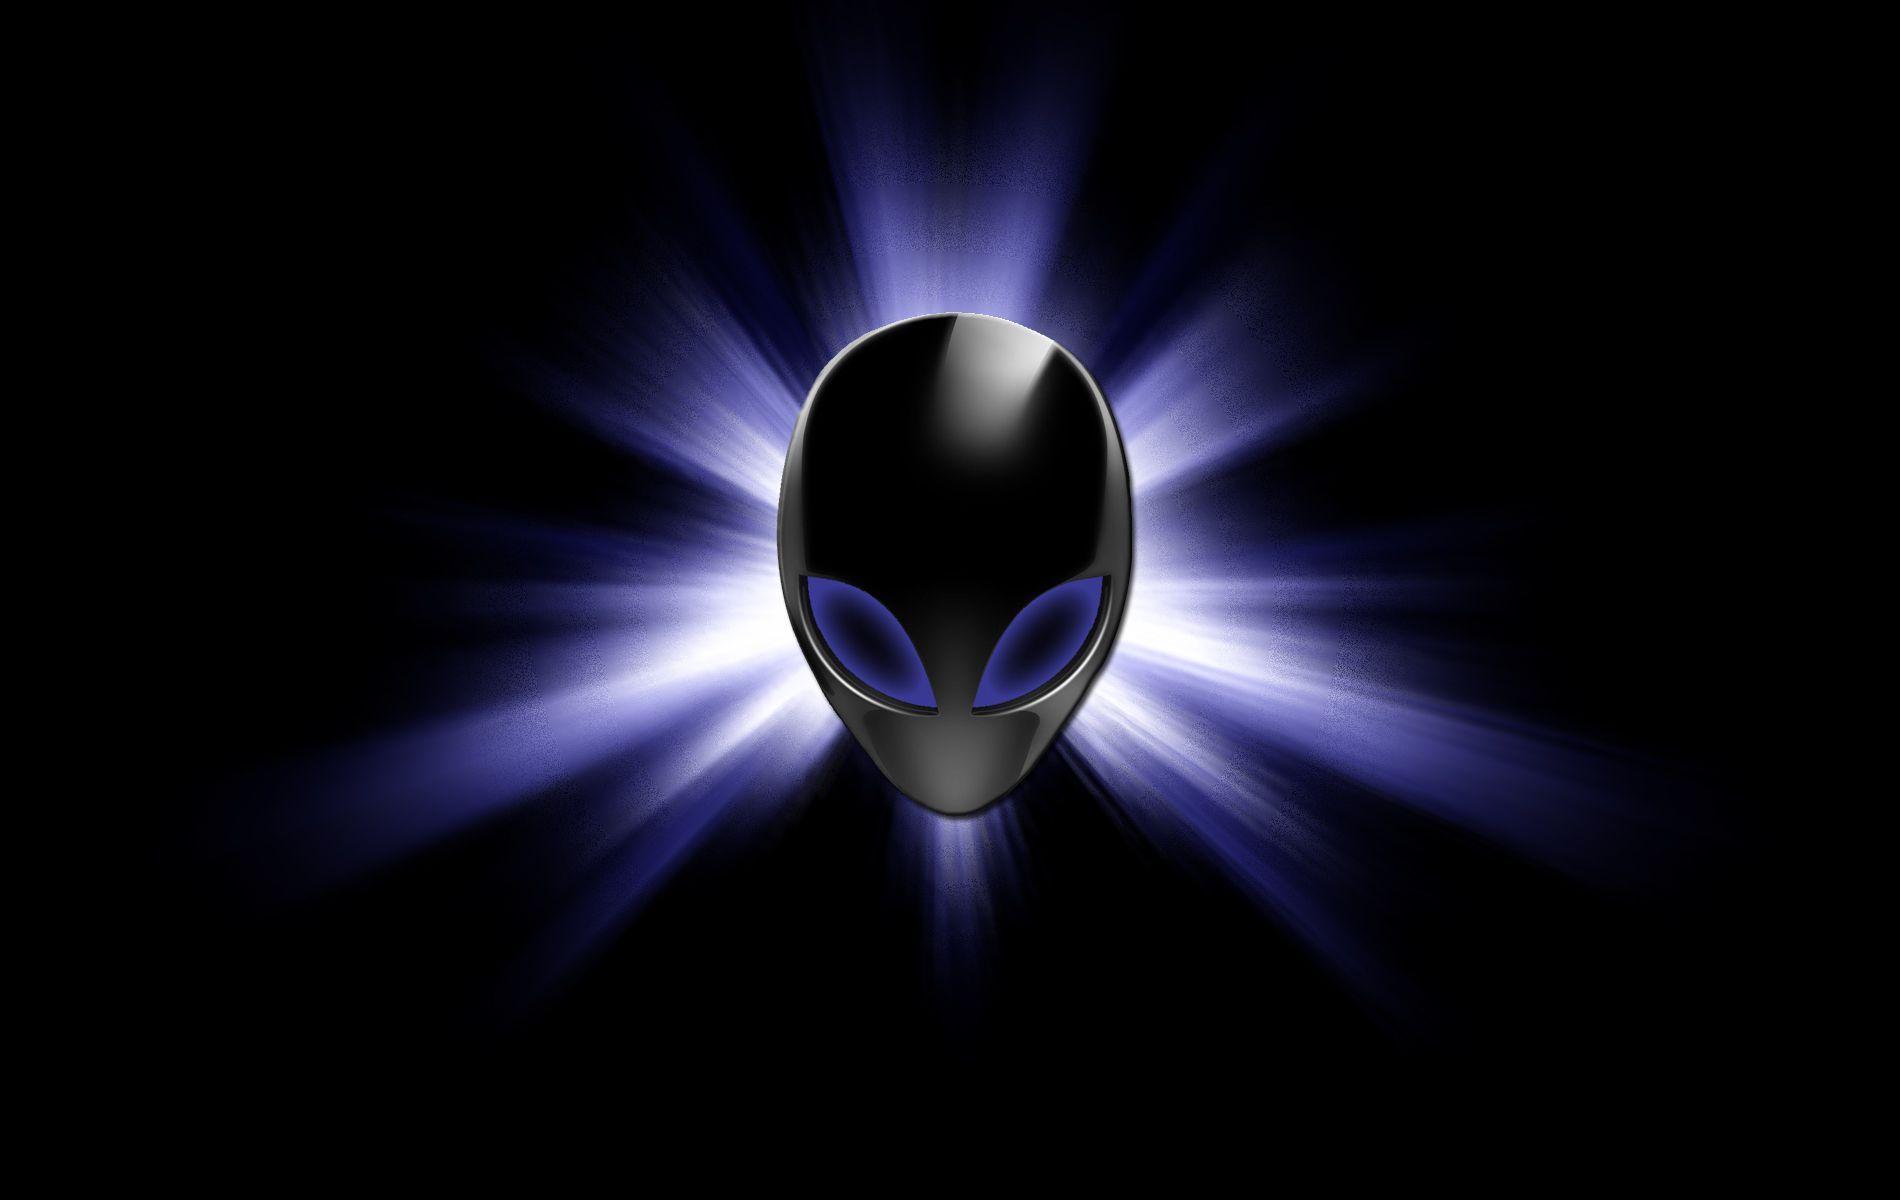 Alienware Background Picture 36828 High Resolution. download all